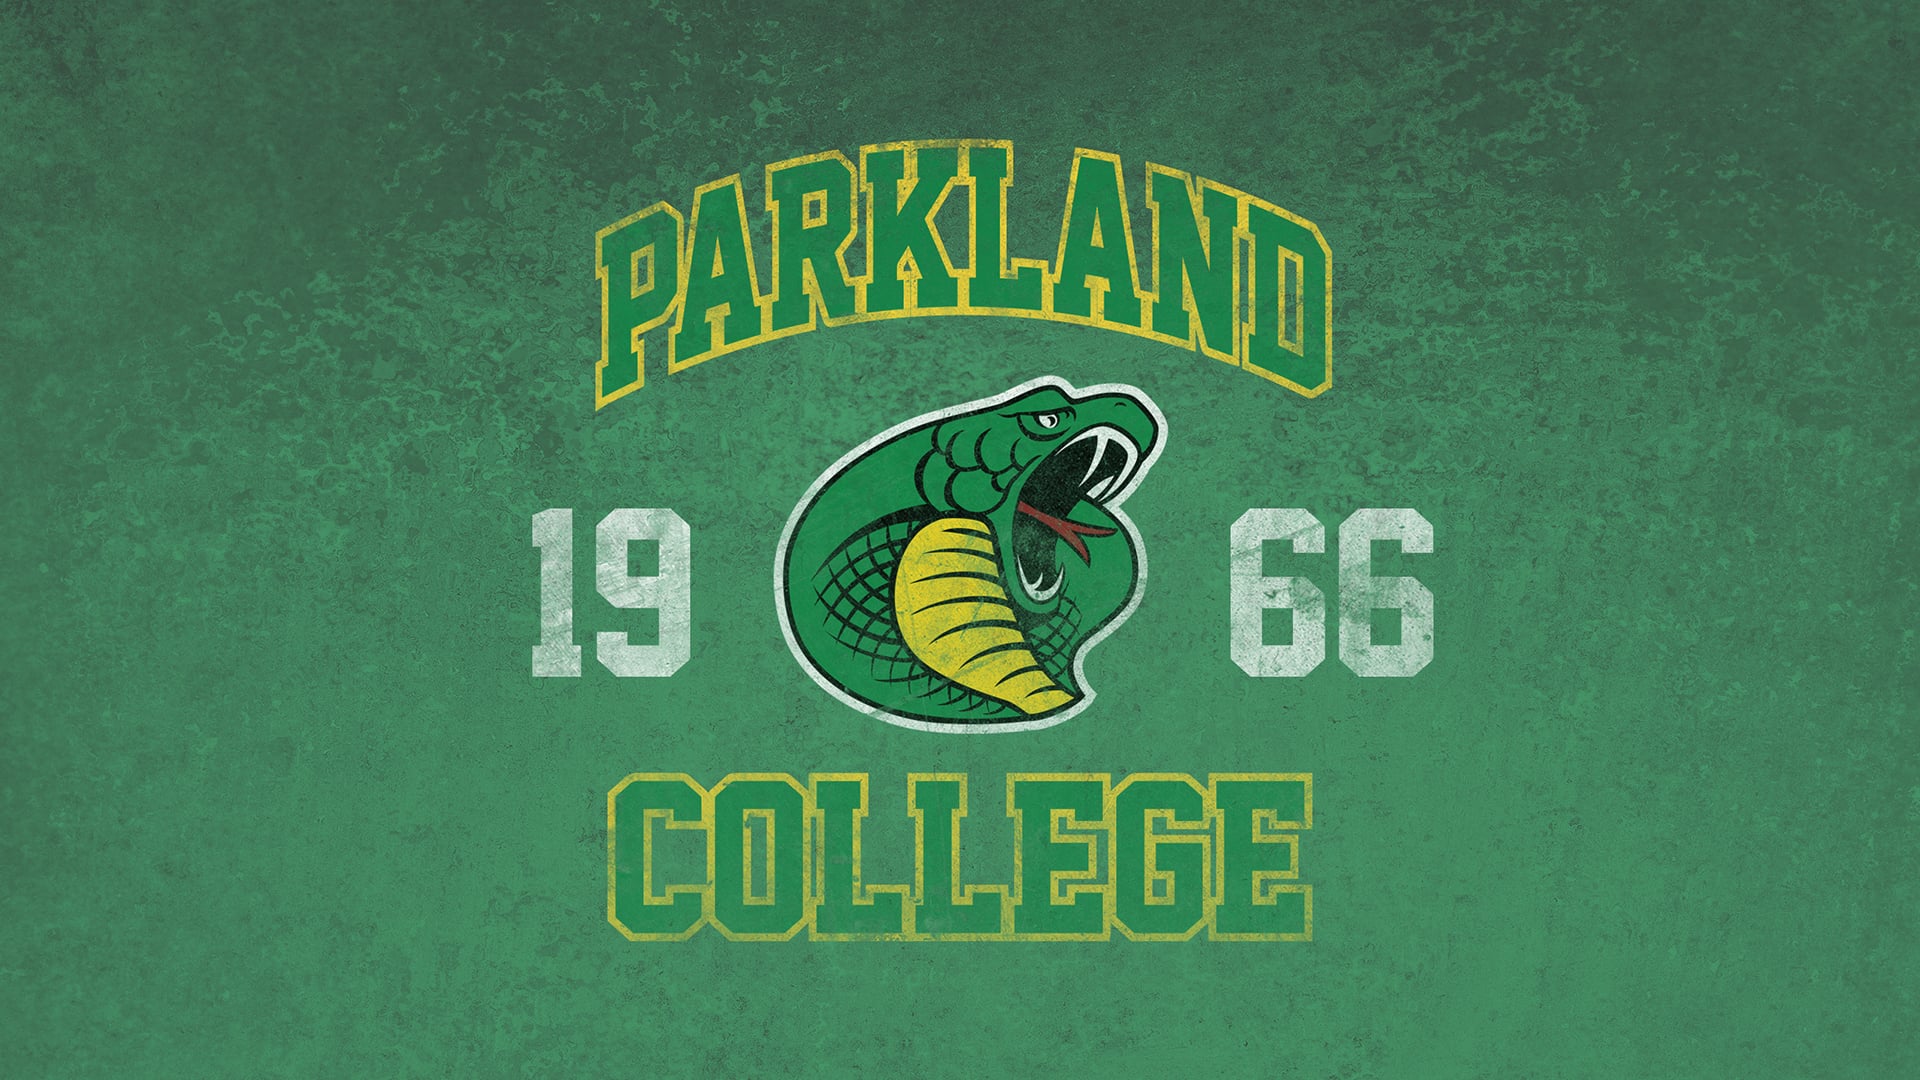 rustic athletic Parkland college and cobra logos on green